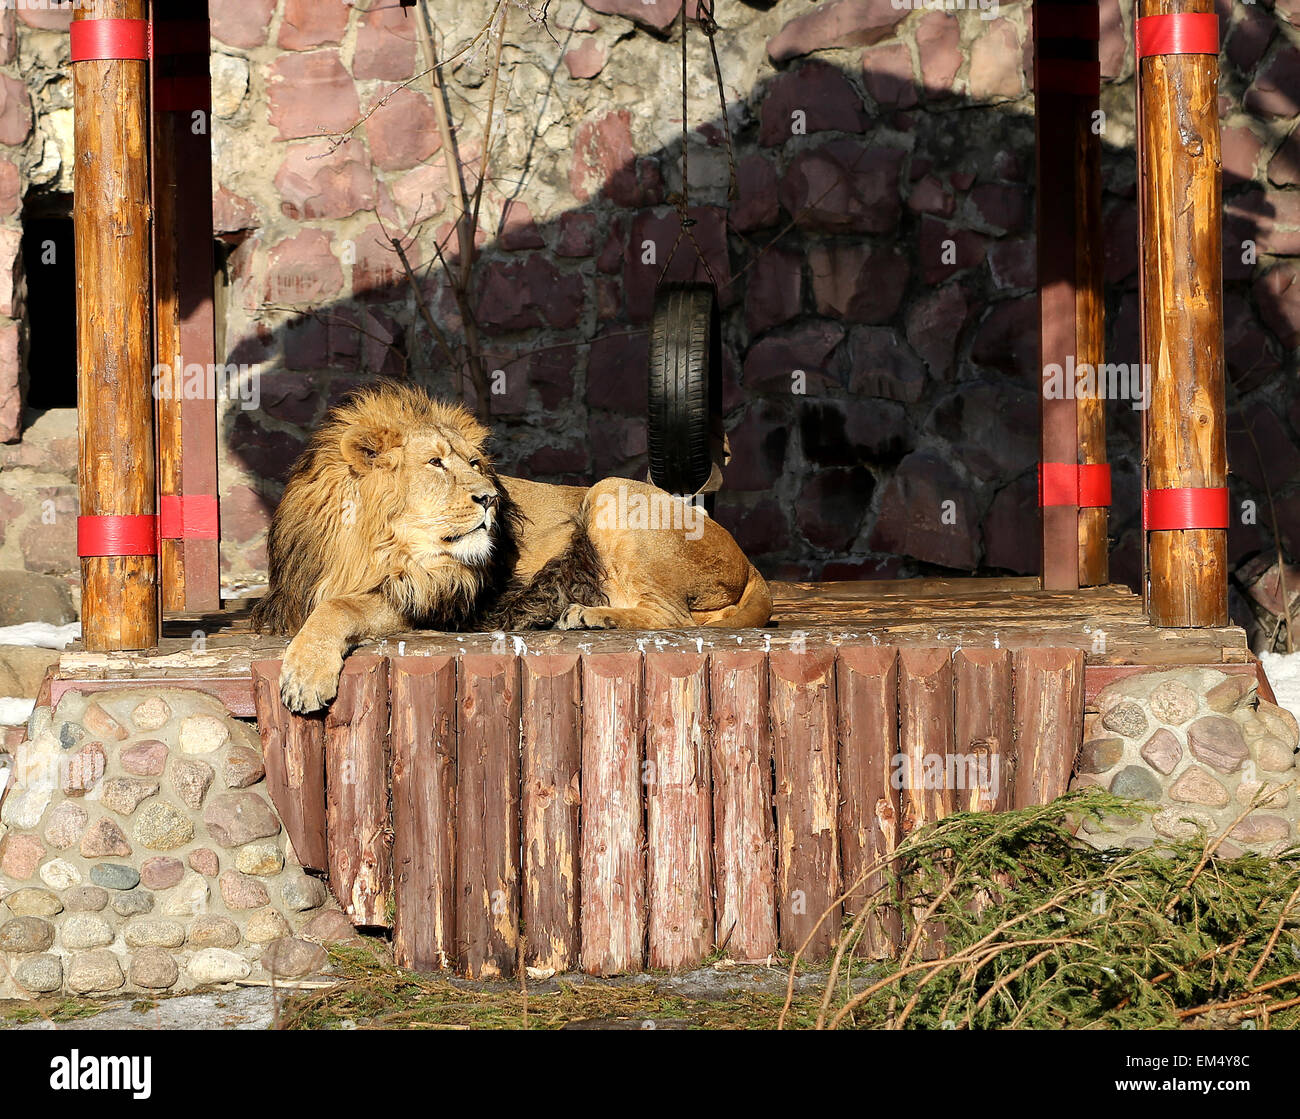 Big beautiful lion lies in his lair Stock Photo